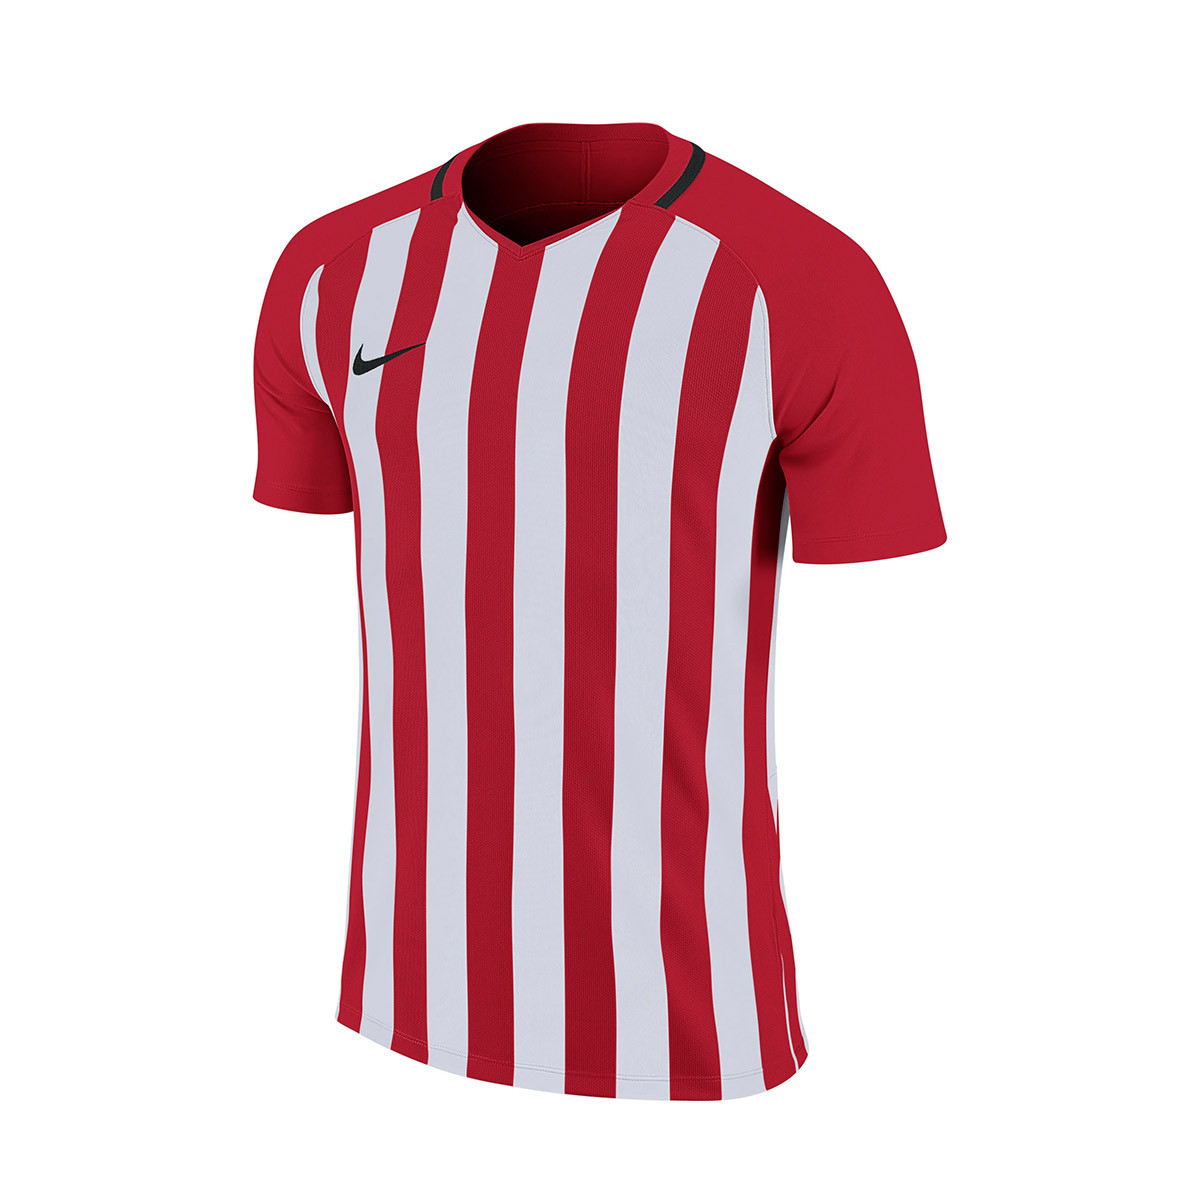 red and white striped jersey